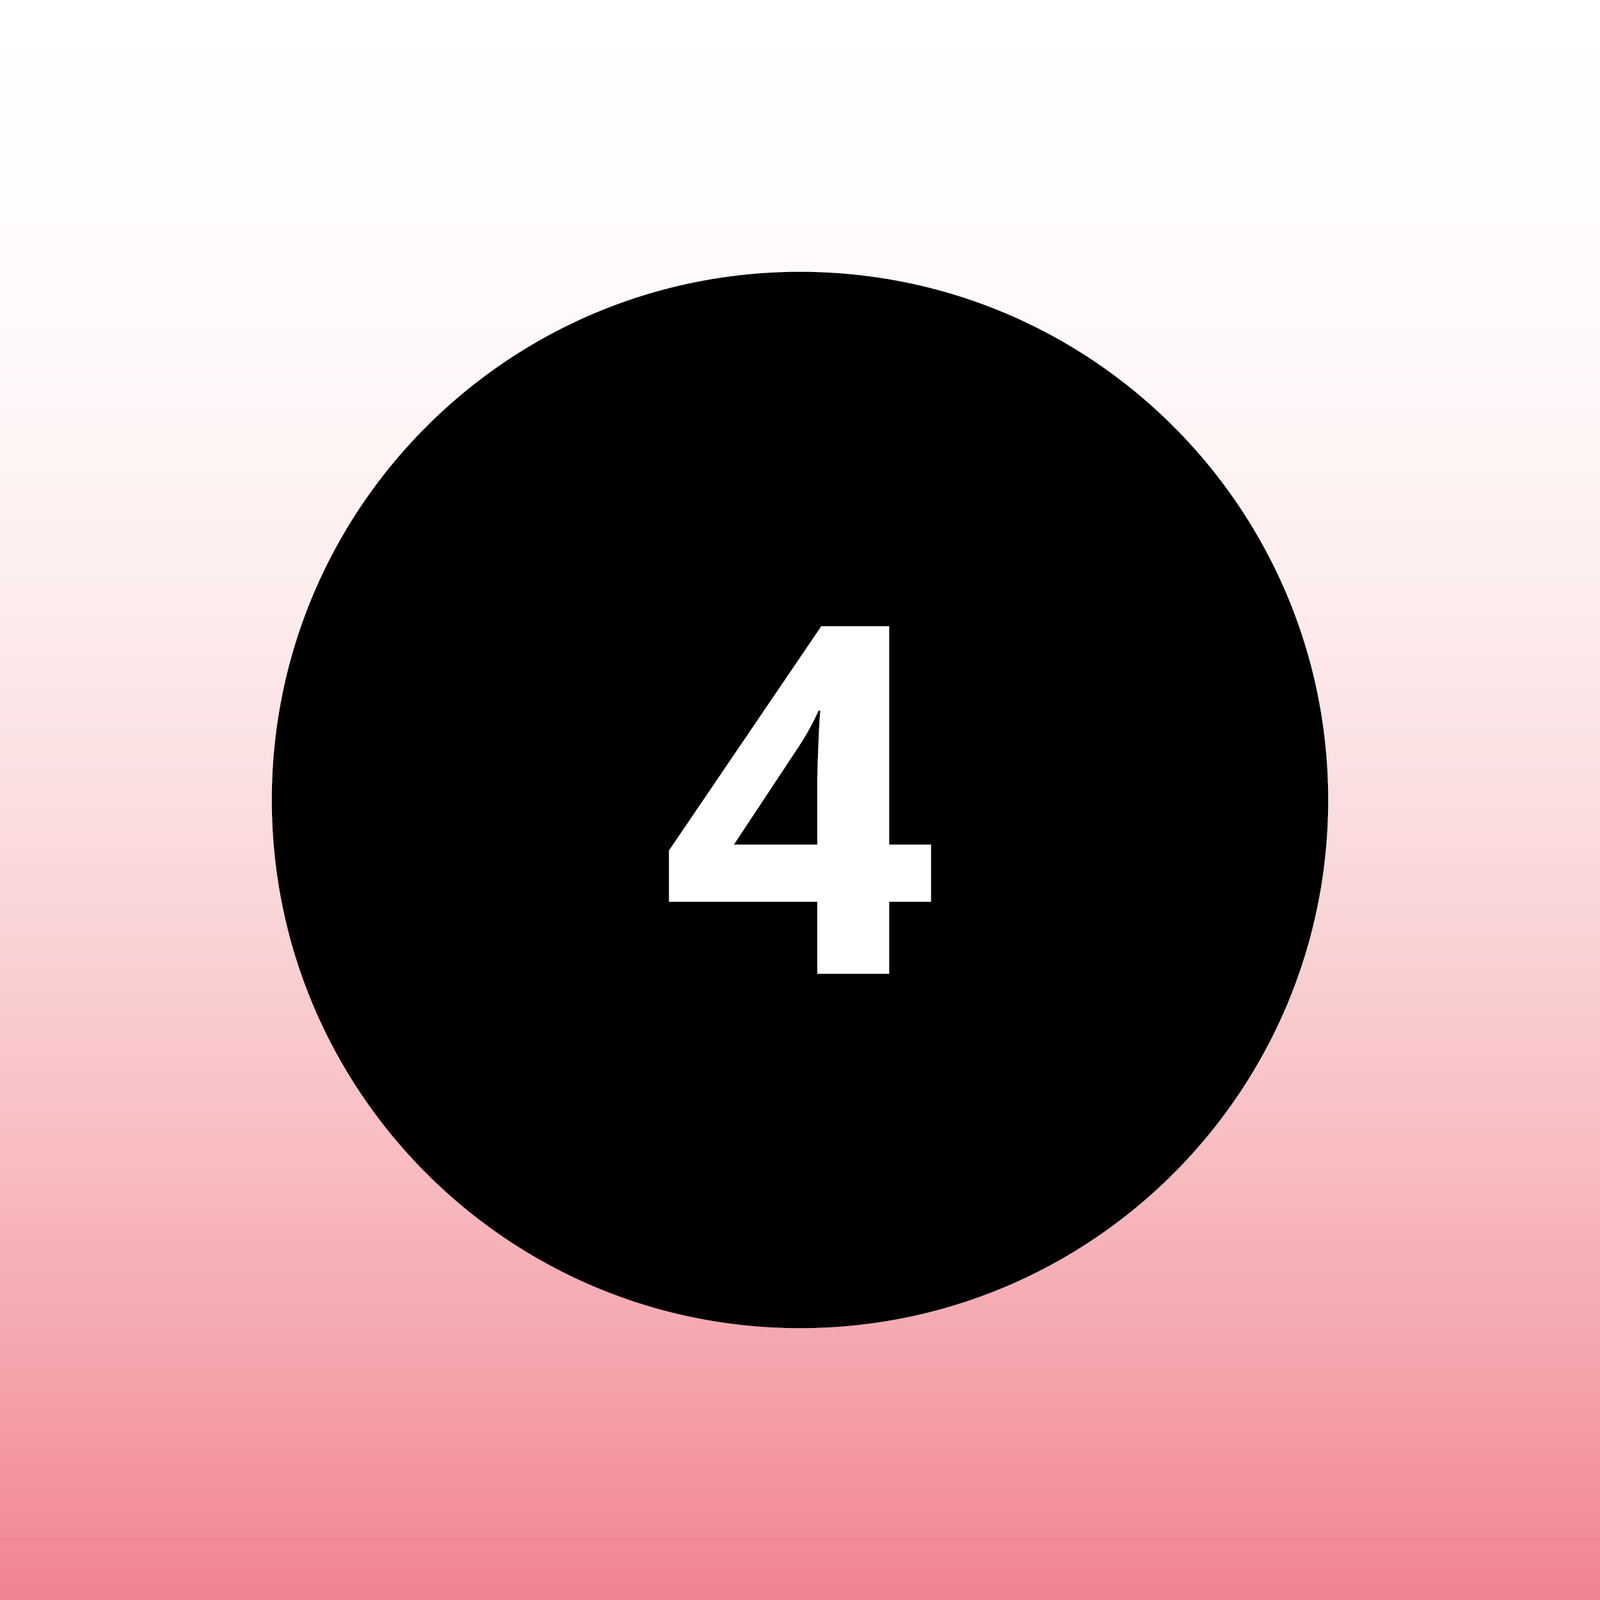 Number 4 with a black circle and a pink gradient.